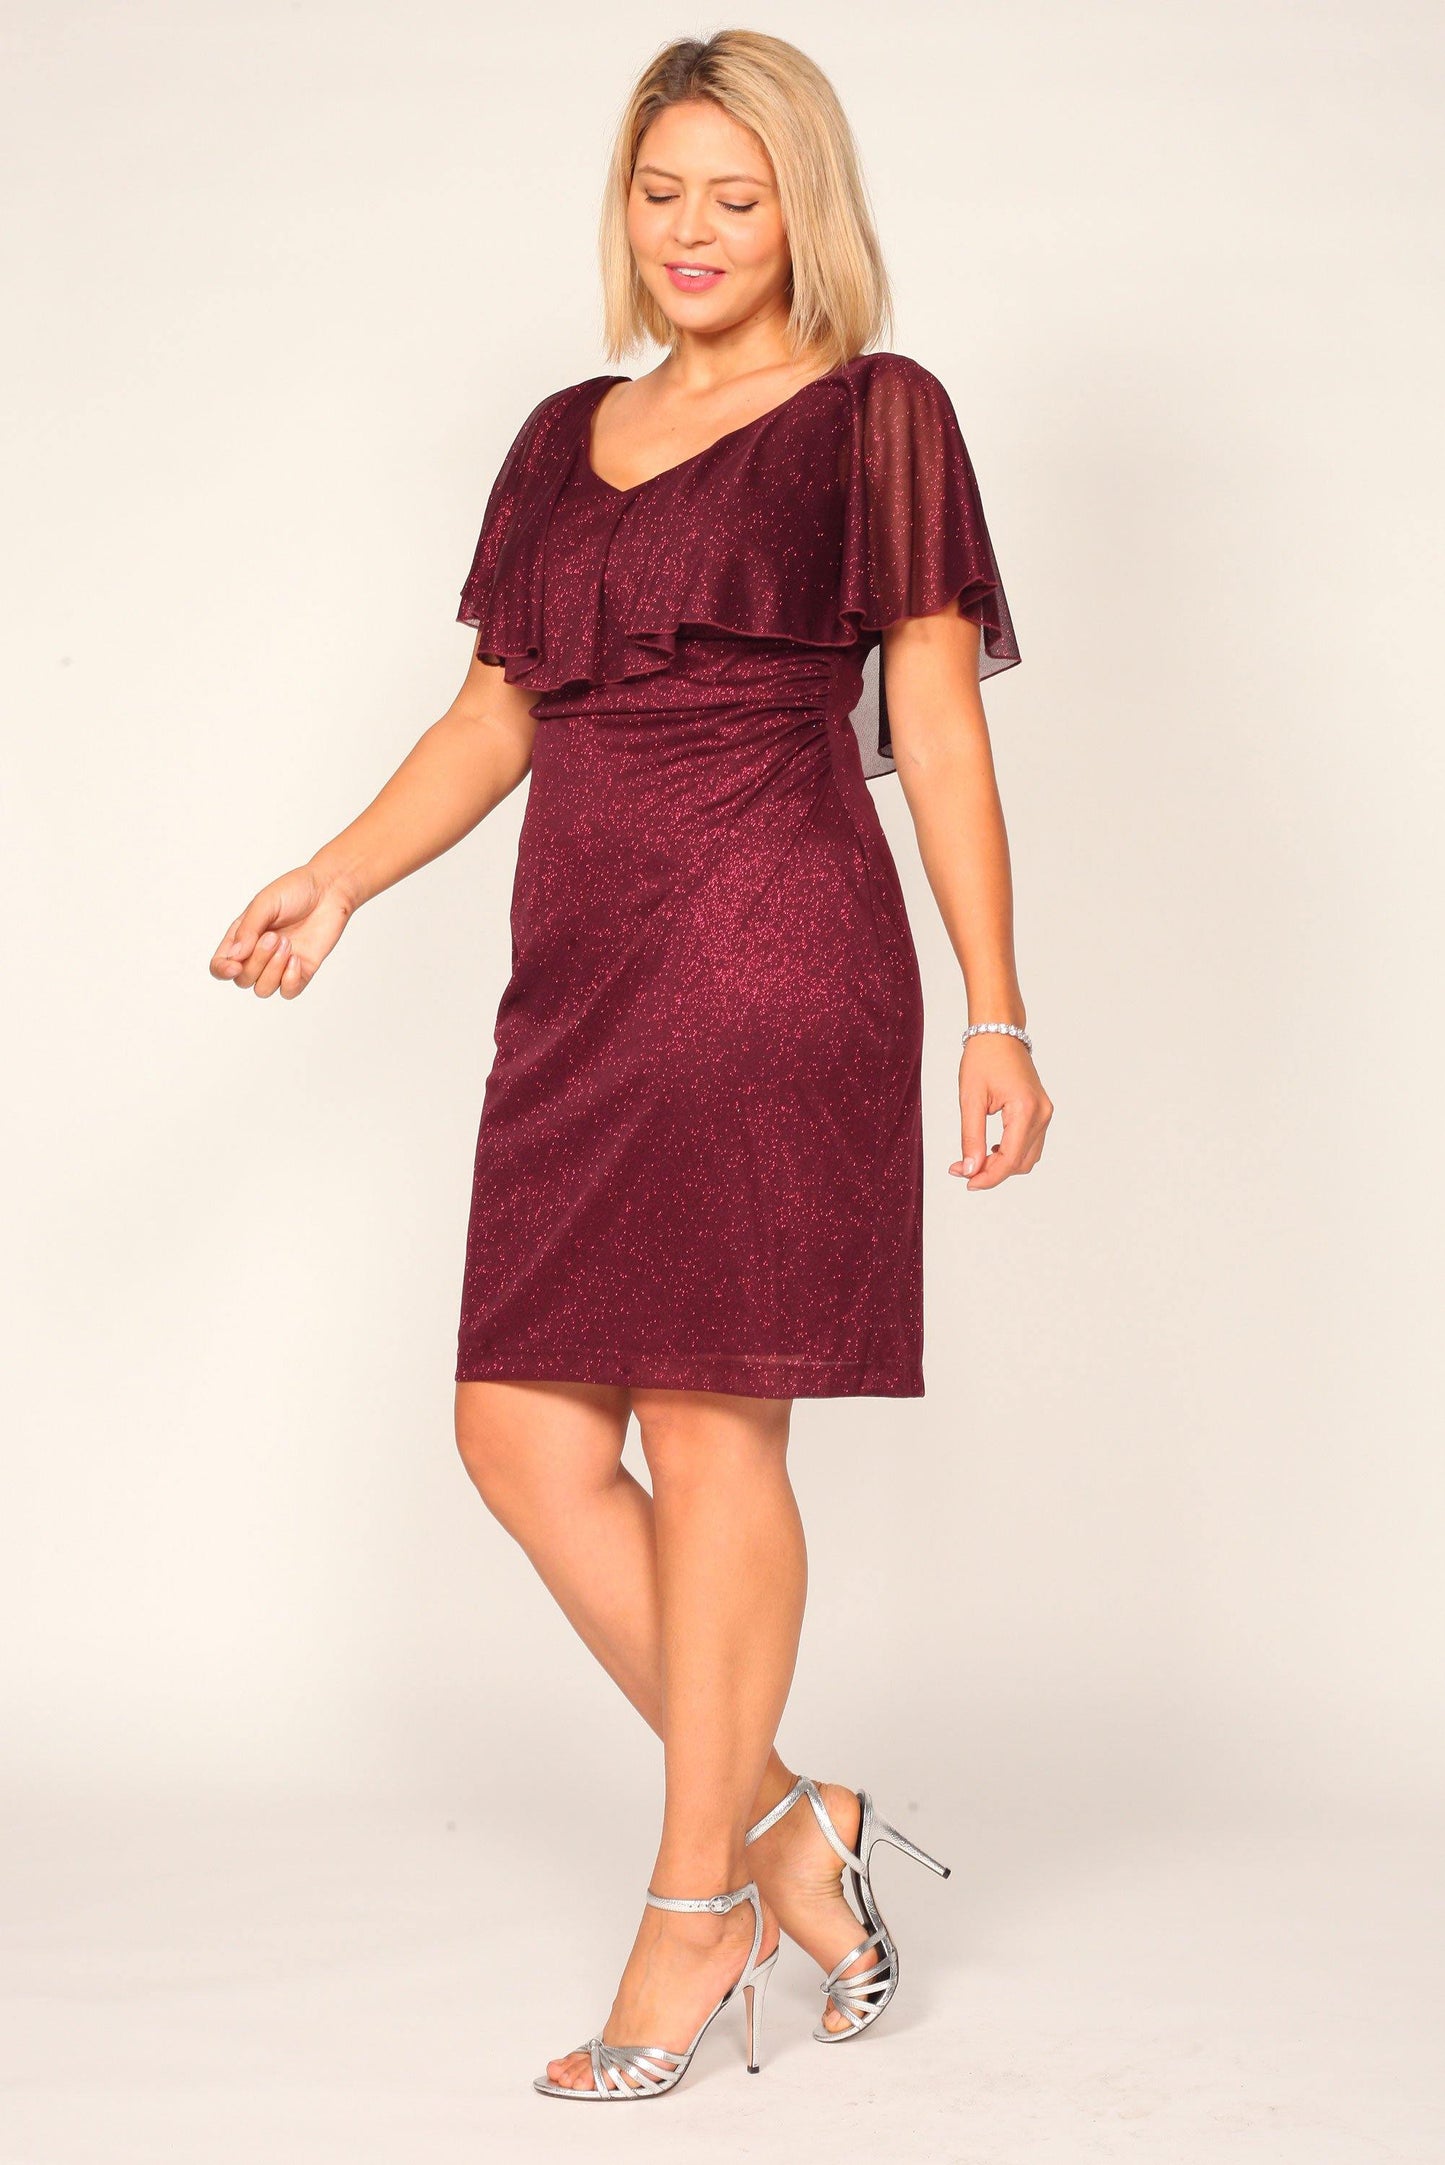 Connected Apparel Formal Short Cocktail Dress - The Dress Outlet